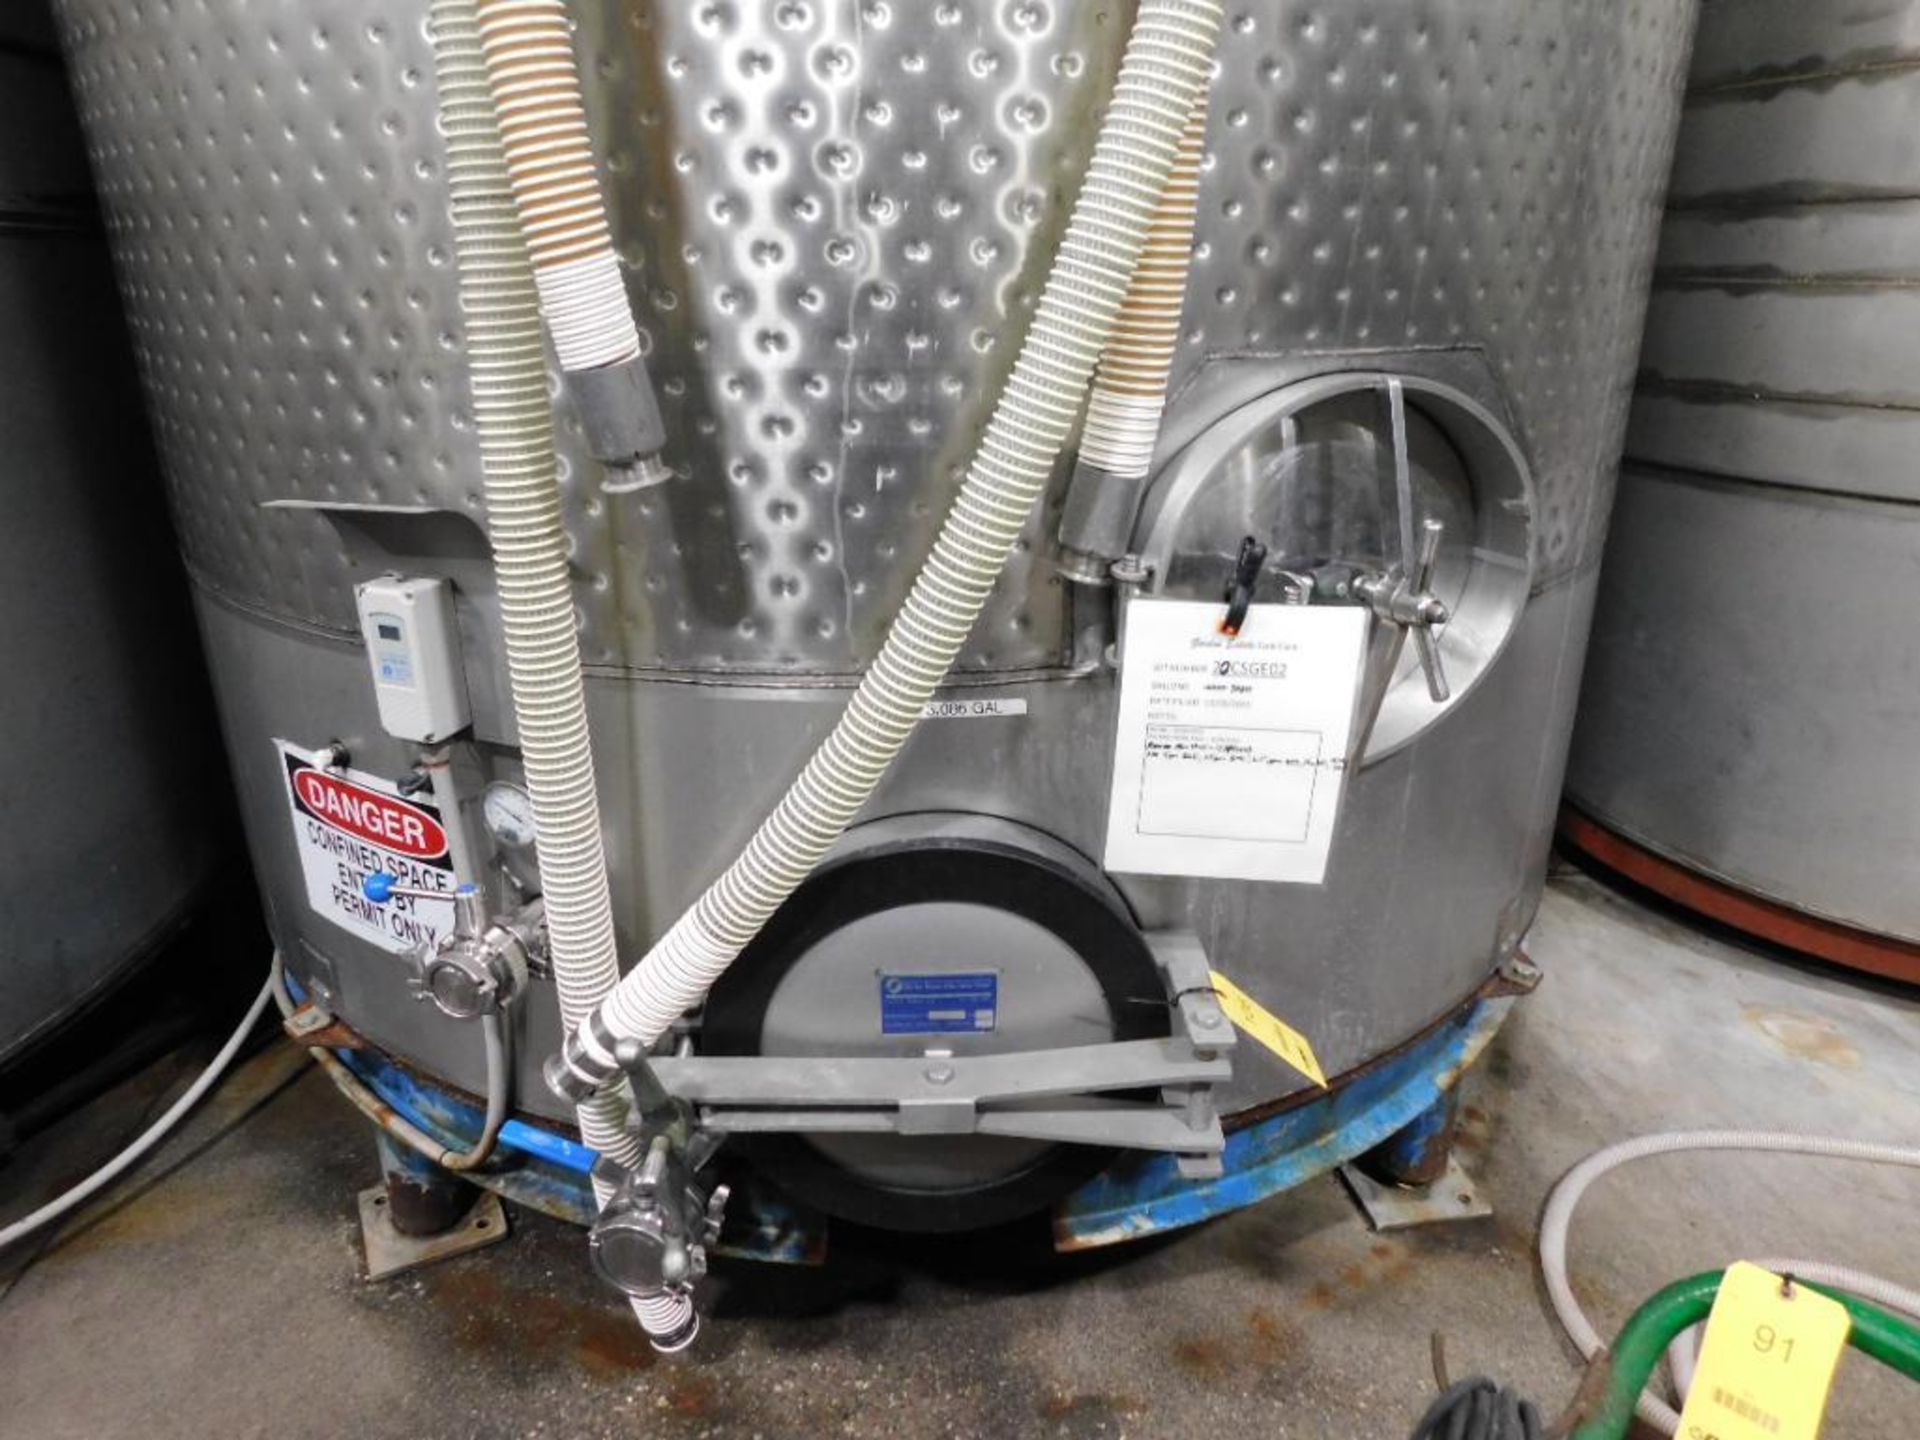 Santa Rossa 3,000 Gallon Stainless Steel Wine Fermentation Tank w/Glycol Jacket (LOCATED IN WINERY) - Image 3 of 3